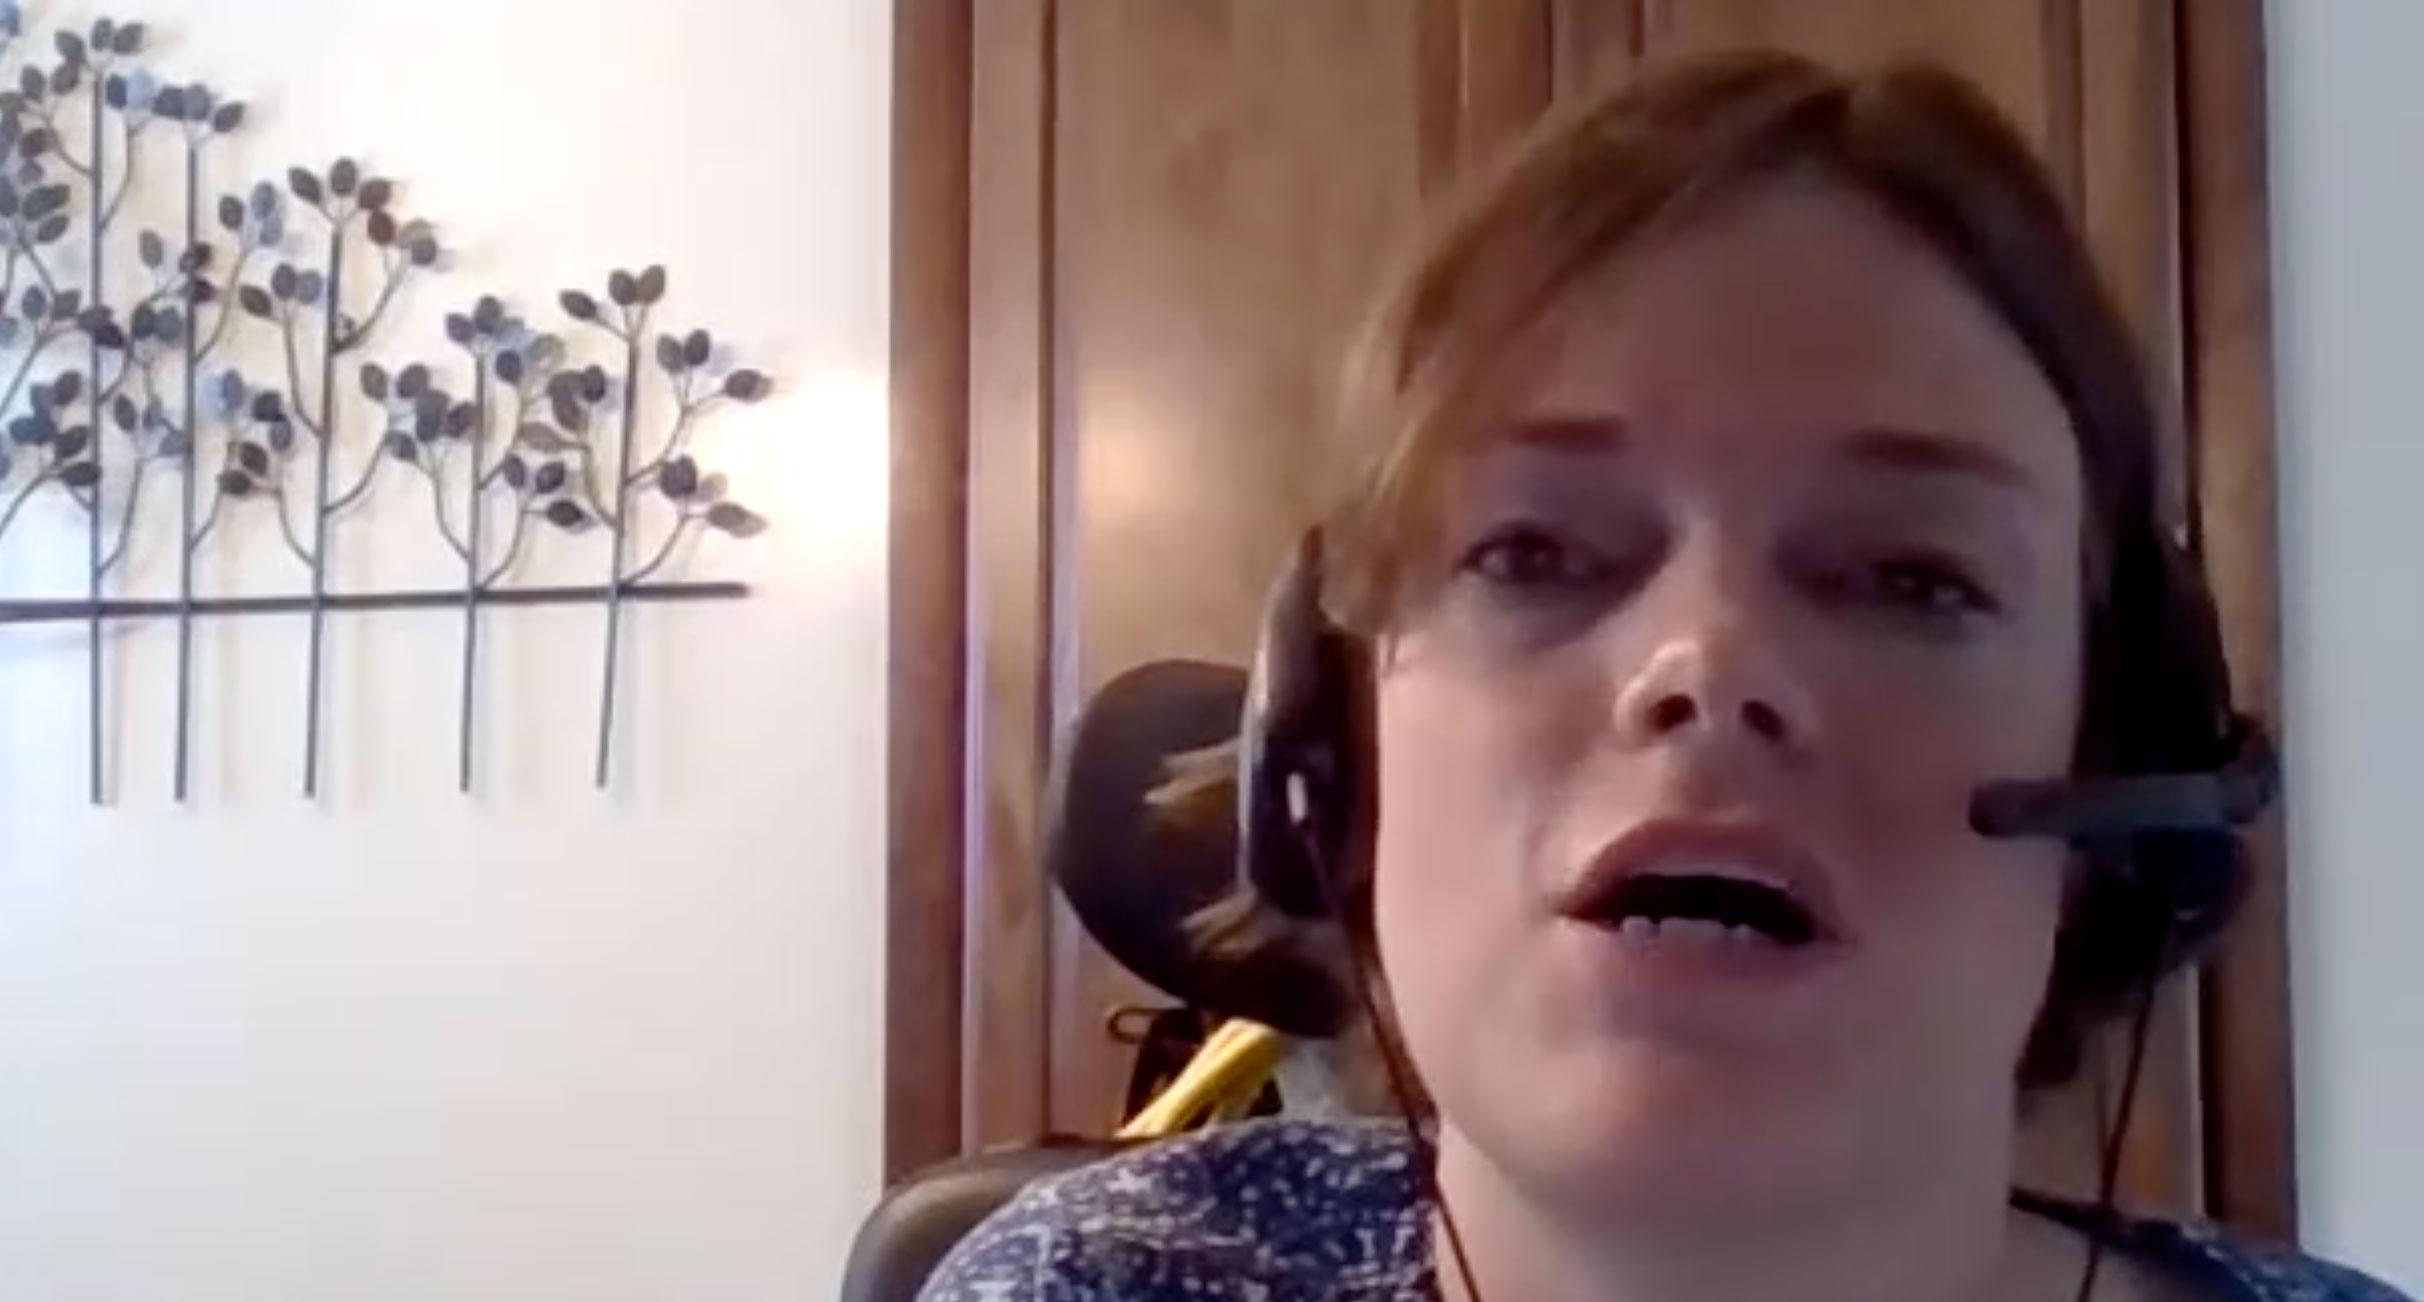 Screen capture of a woman on video chat wearing a headset with microphone.